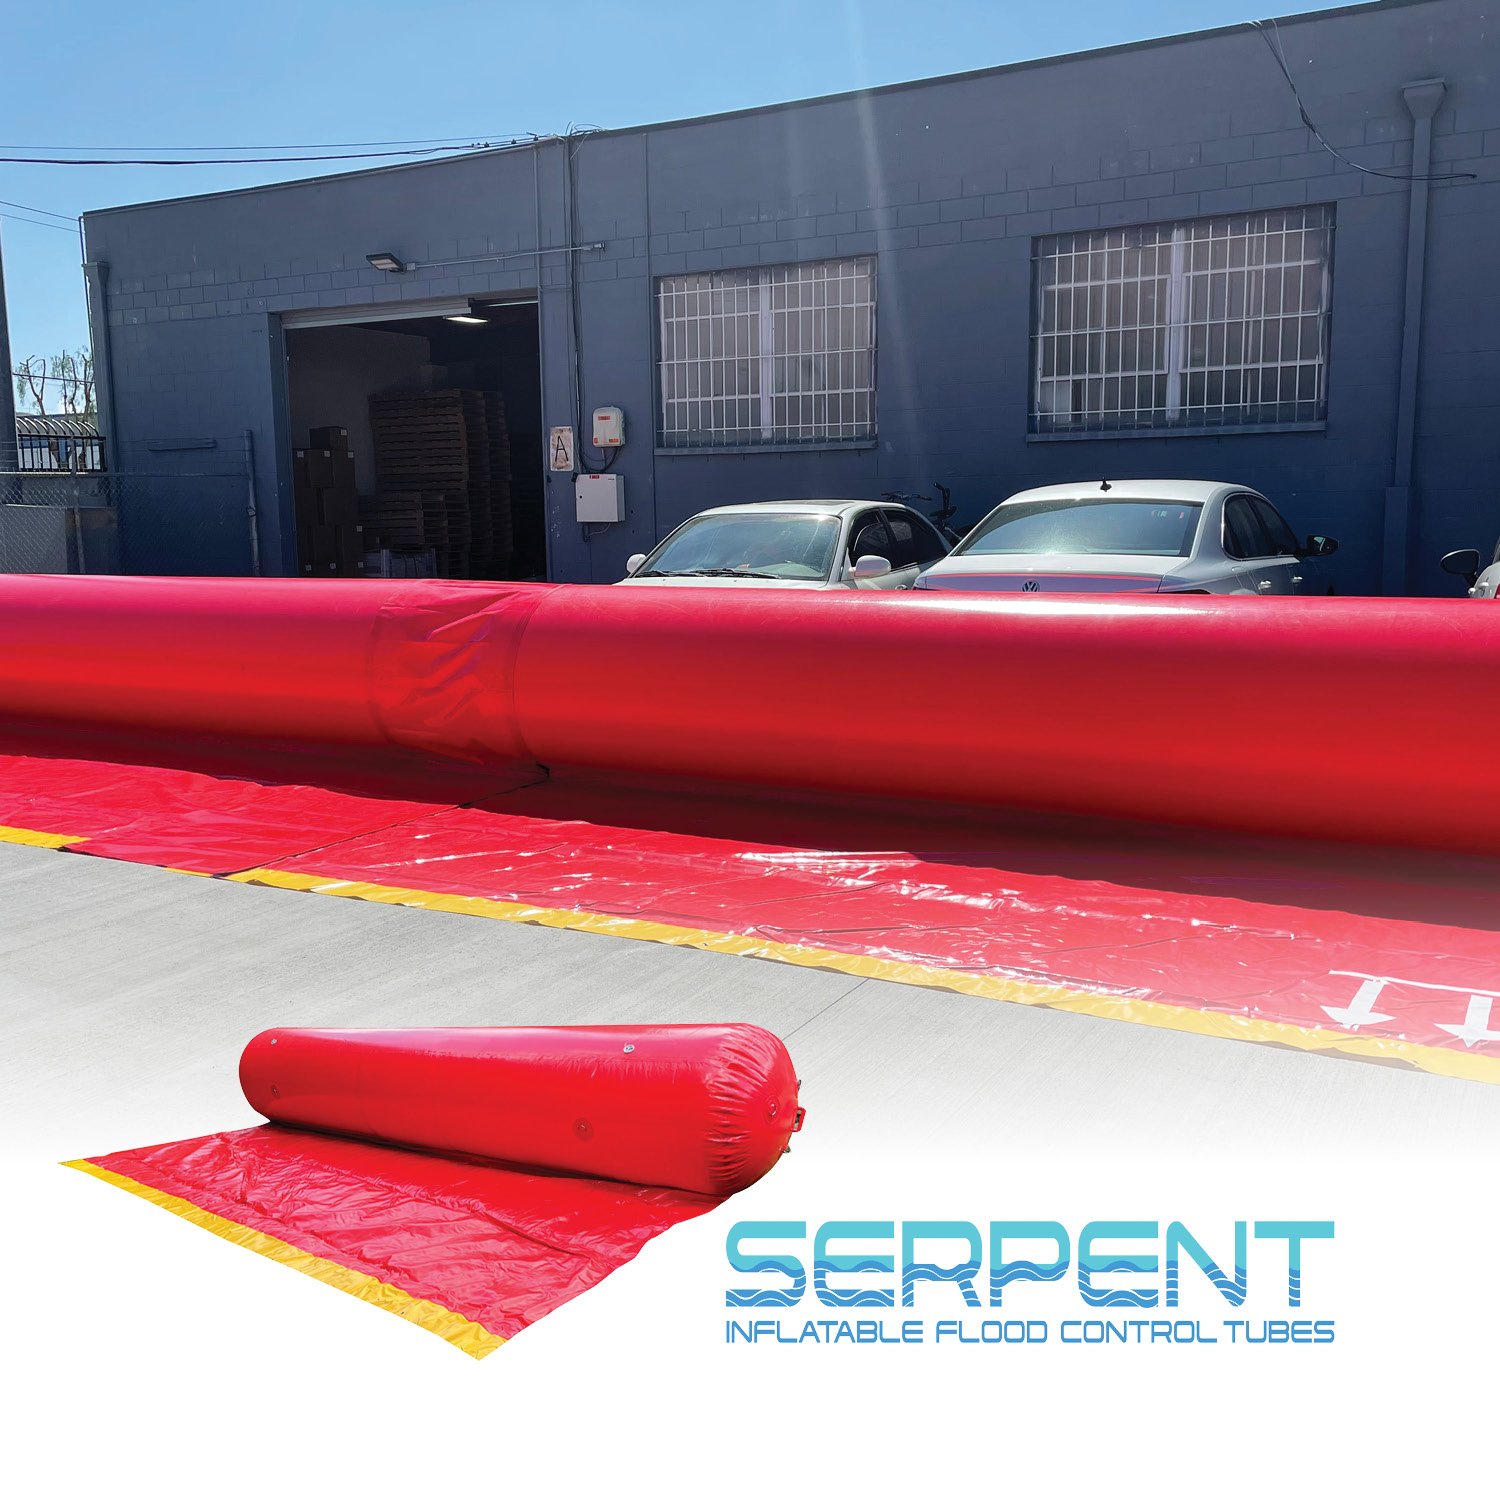 Serpent Inflatable Flood Control Tubes